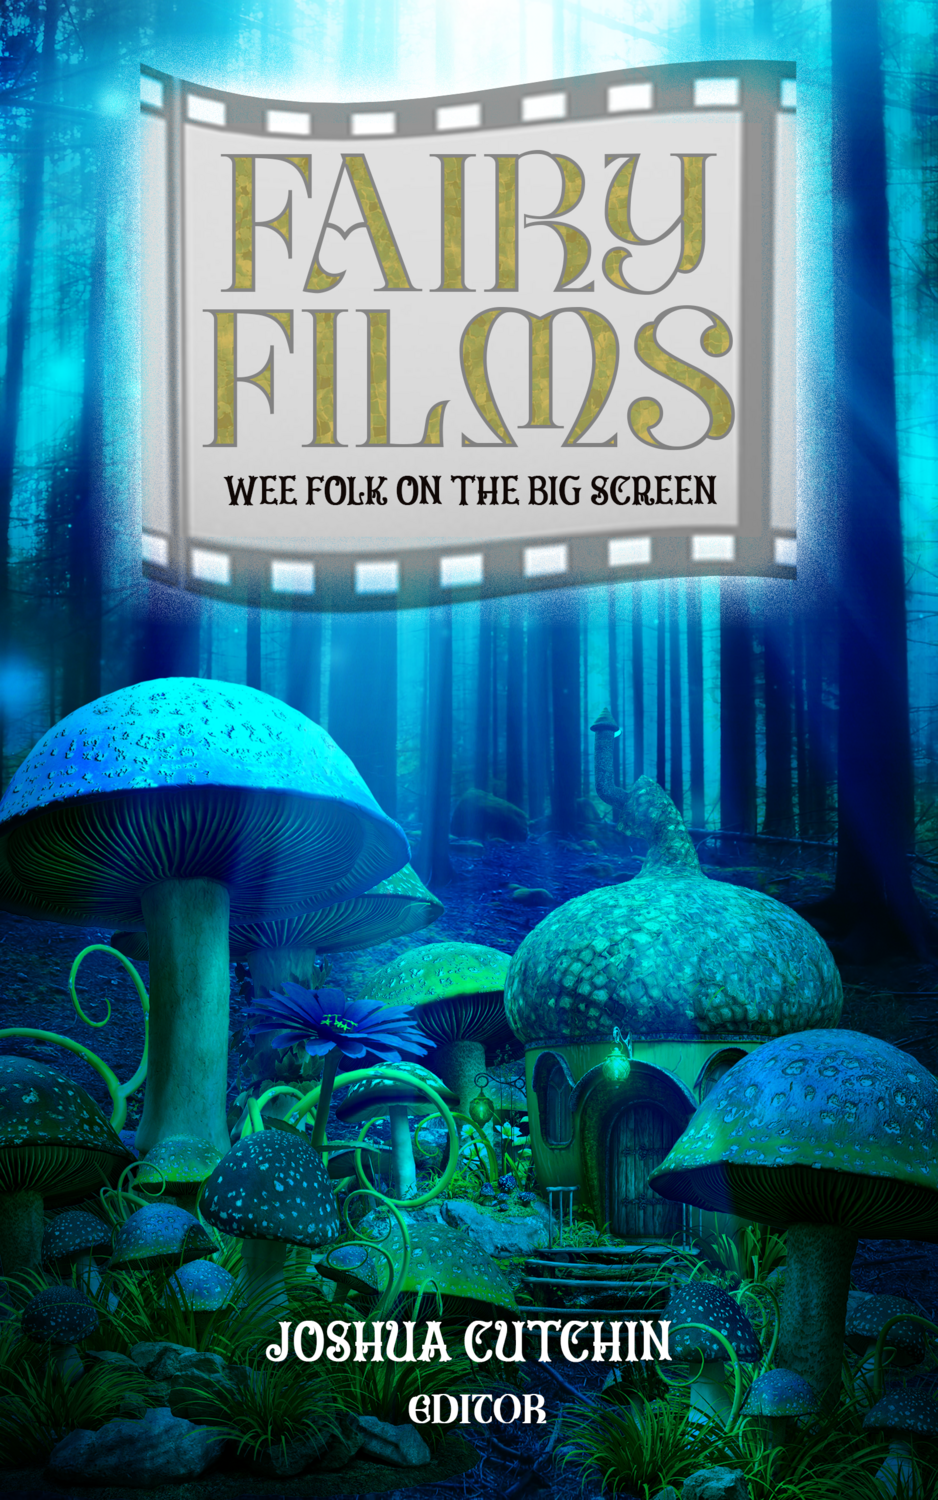 Fairy Films: Wee People on the Big Screen